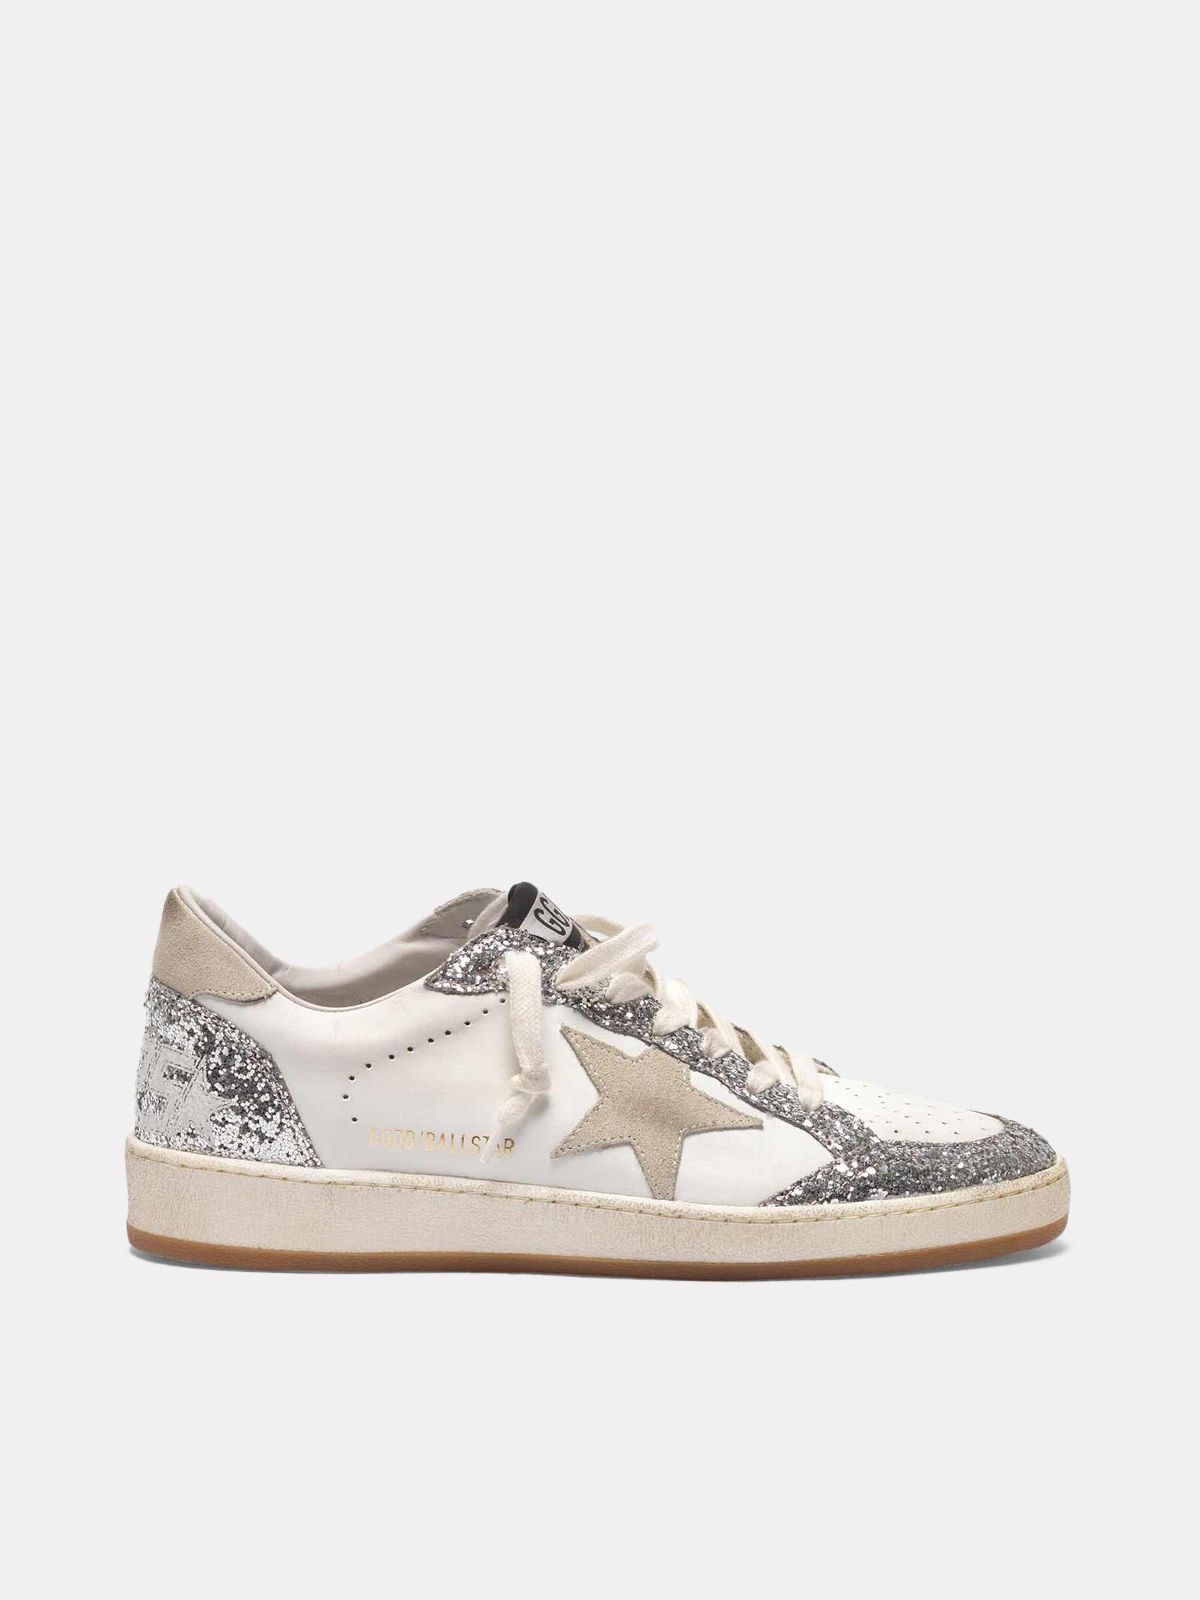 Ball Star sneakers in leather with glittery inserts | Golden Goose